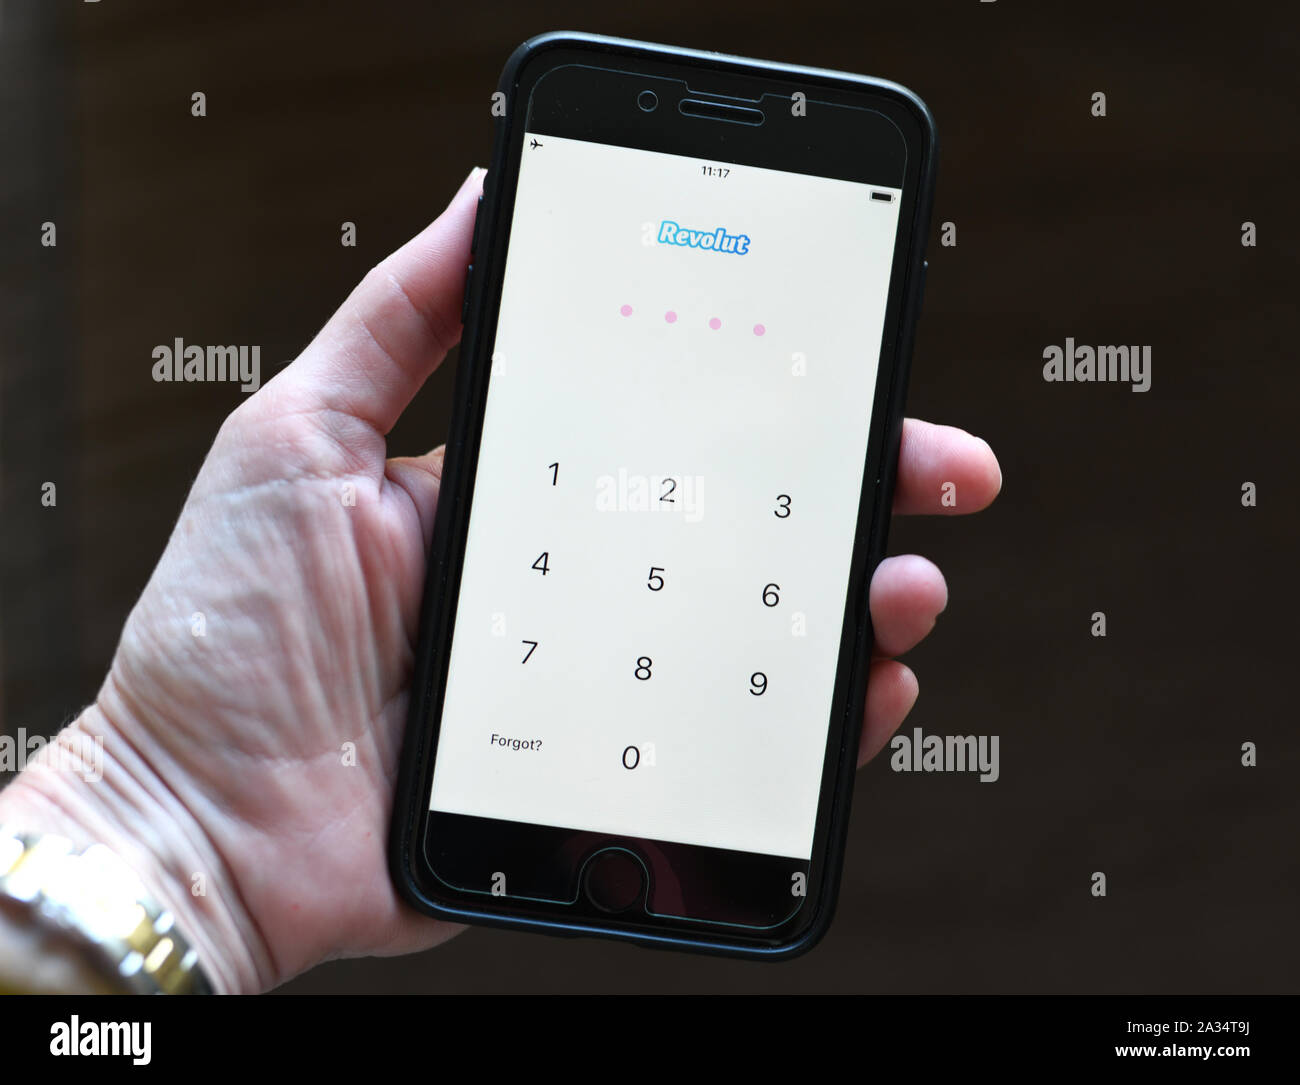 Gibraltar 04 October 2019: An iphone with the screen showing the log in page of the Revolut Banking App Stock Photo